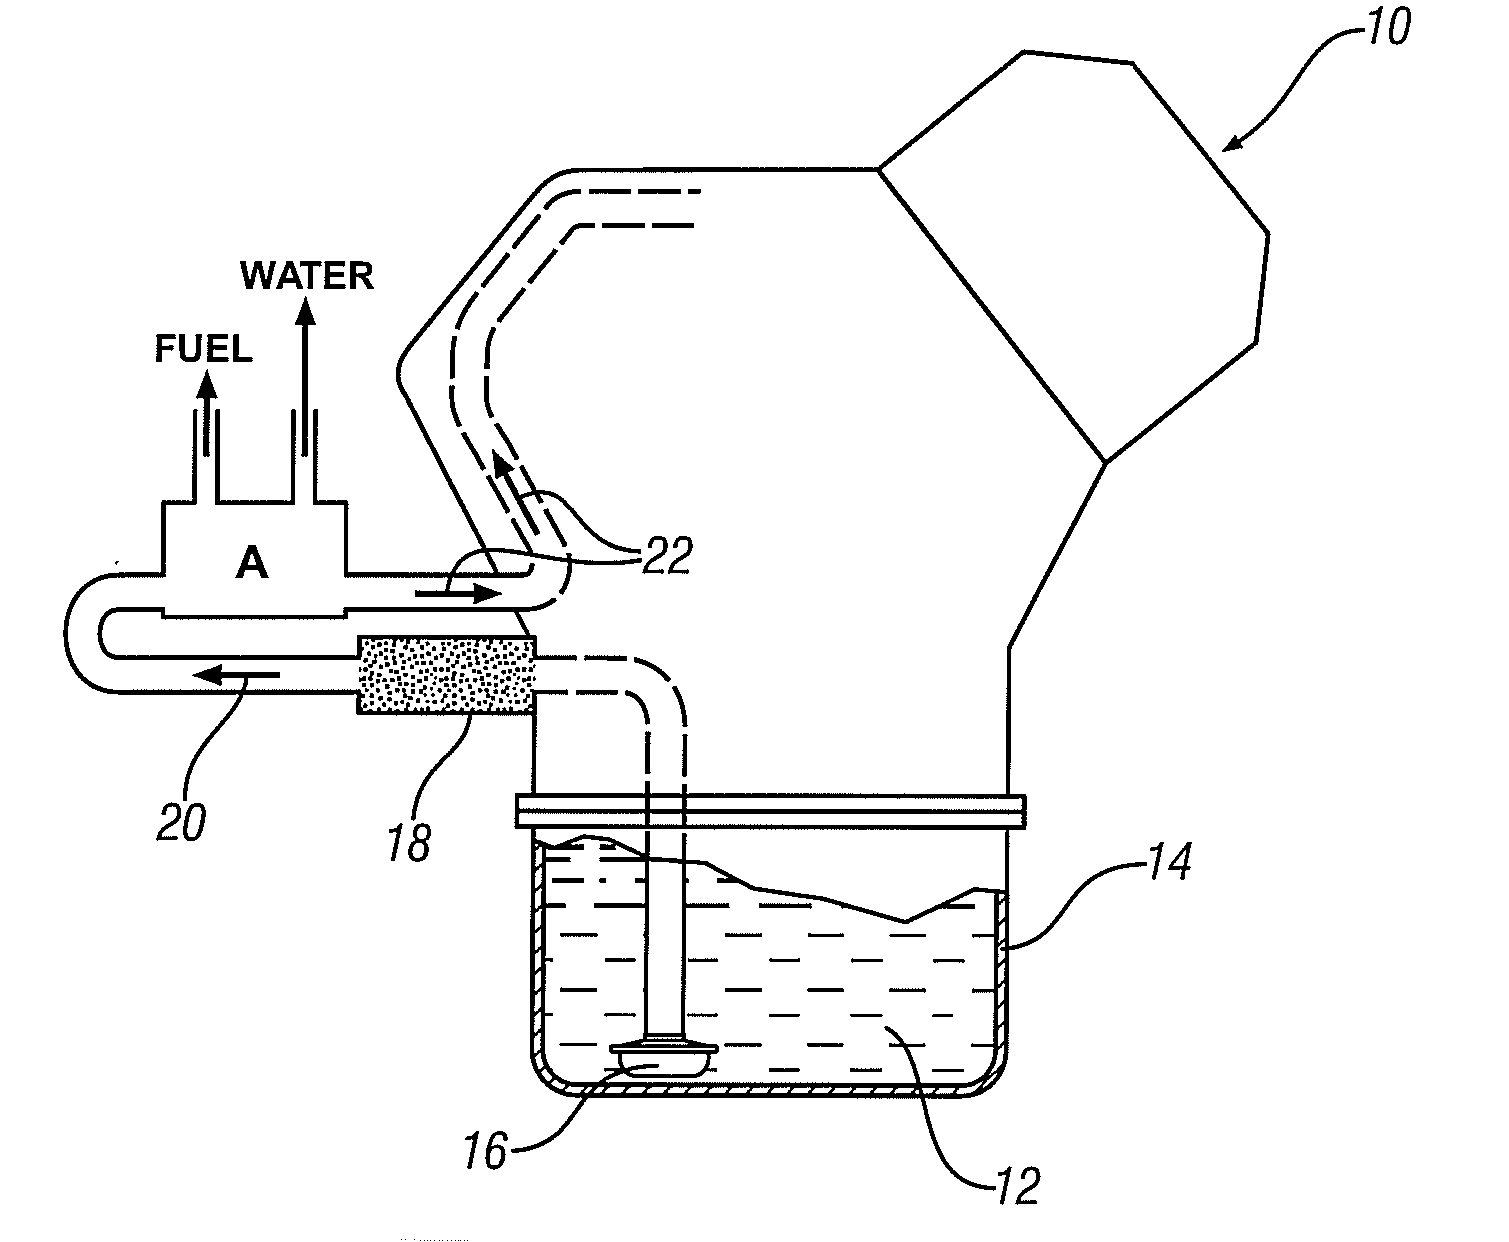 Membrane separation of water and fuel from engine oil in an internal combustion engine